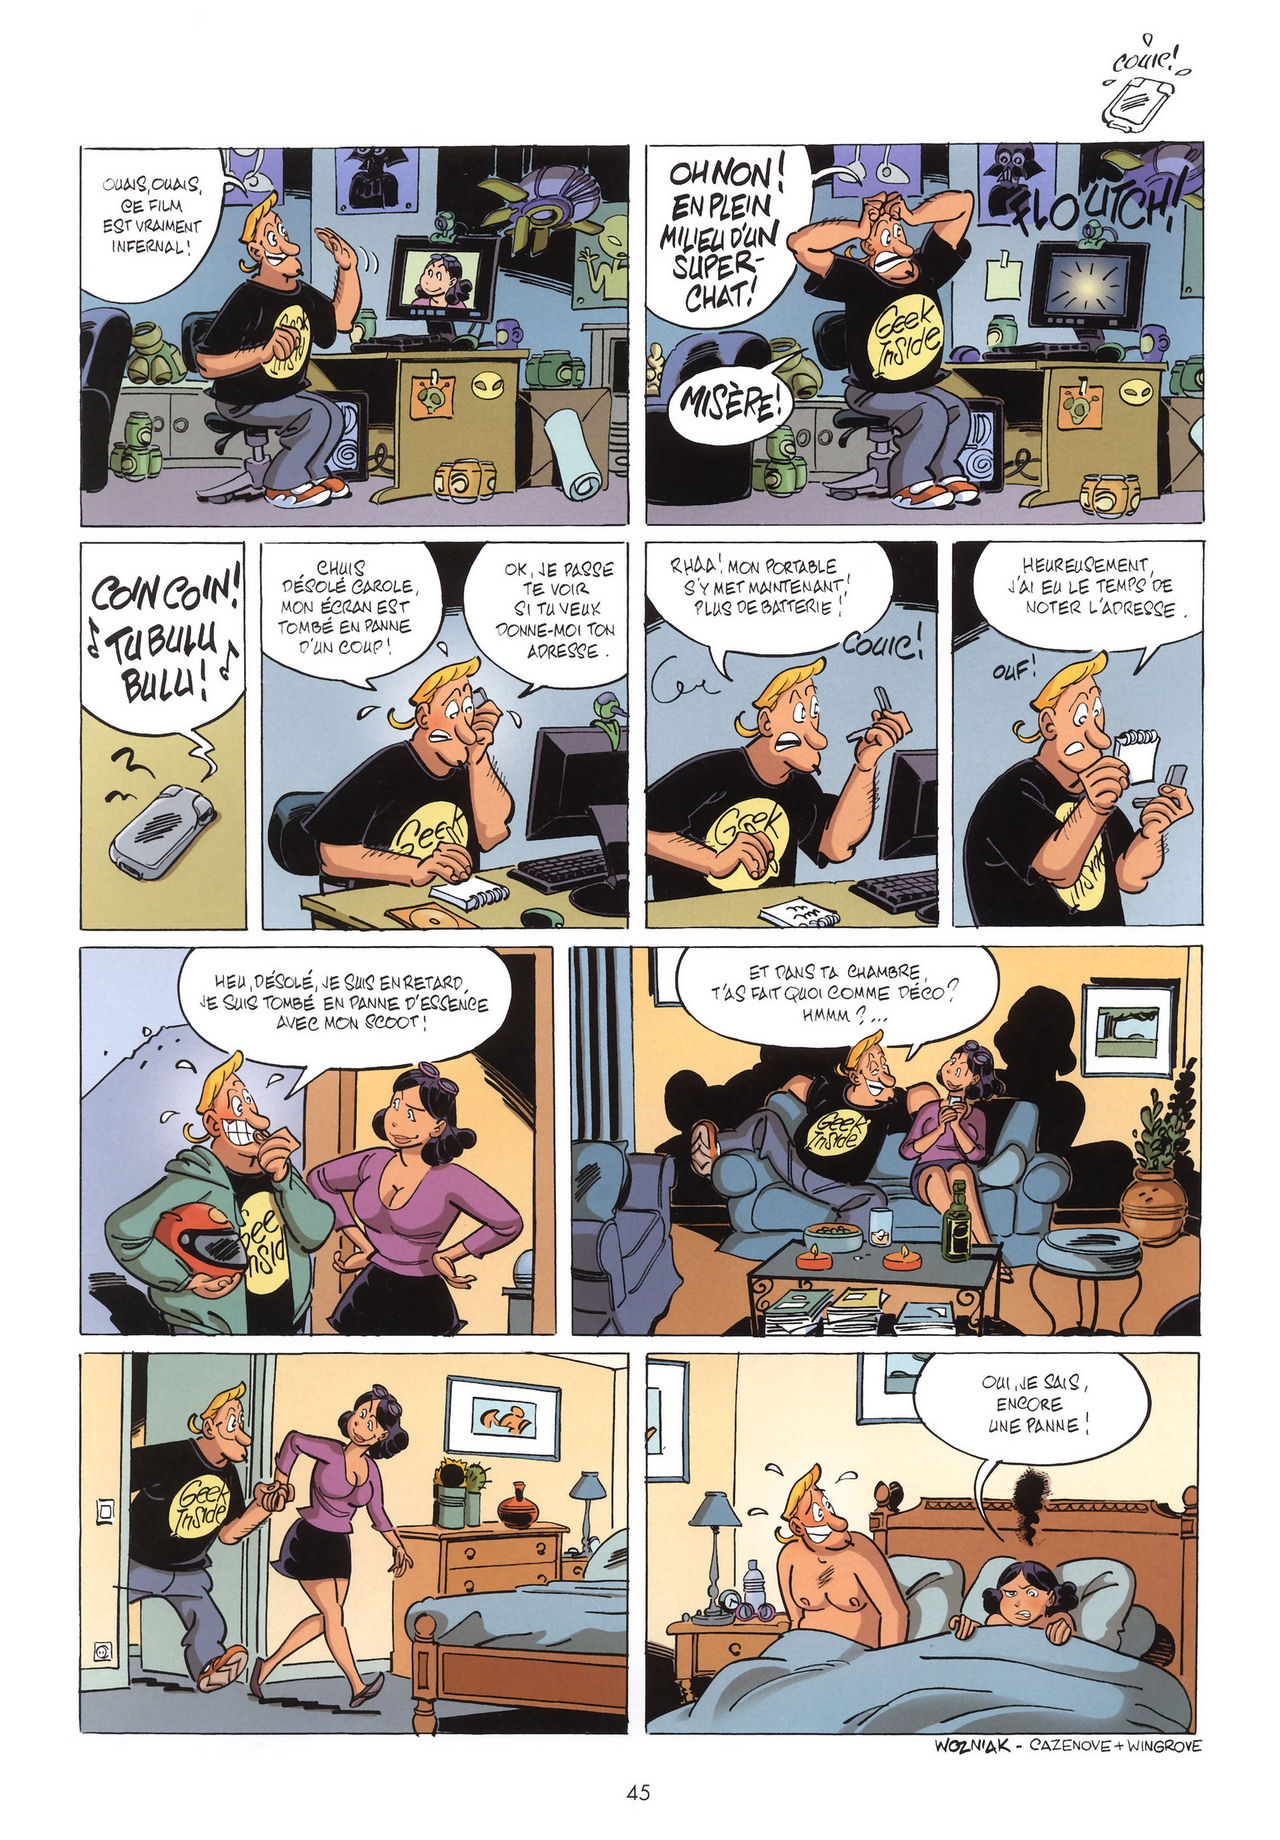 Plan Drague - Tome 02 - Franche Connexion [french] 45